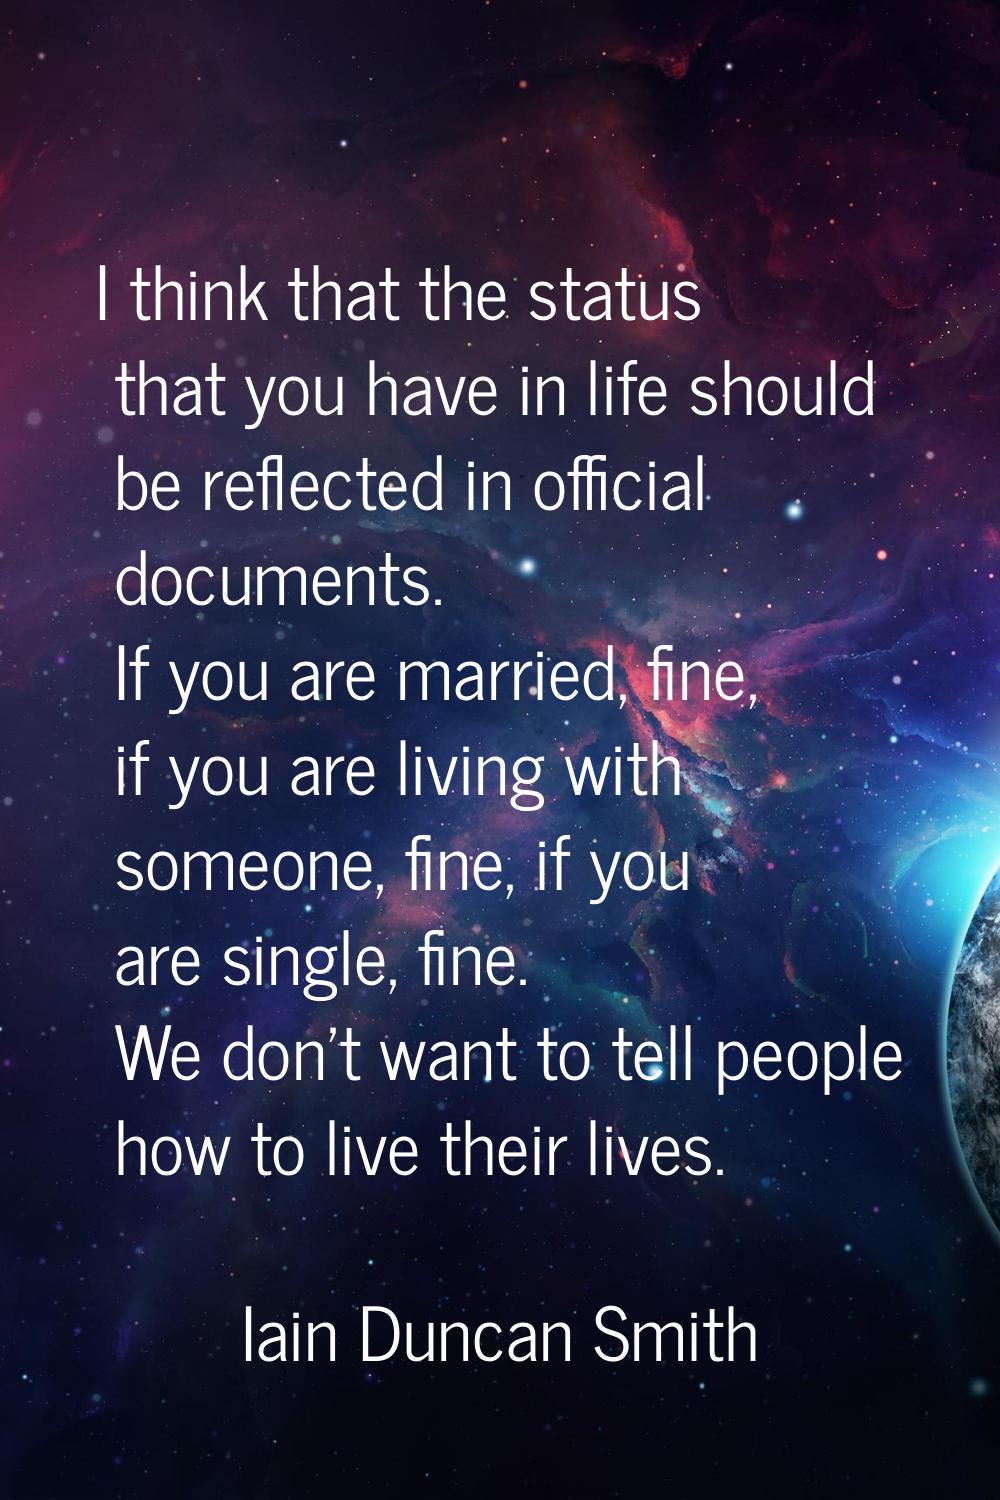 I think that the status that you have in life should be reflected in official documents. If you are